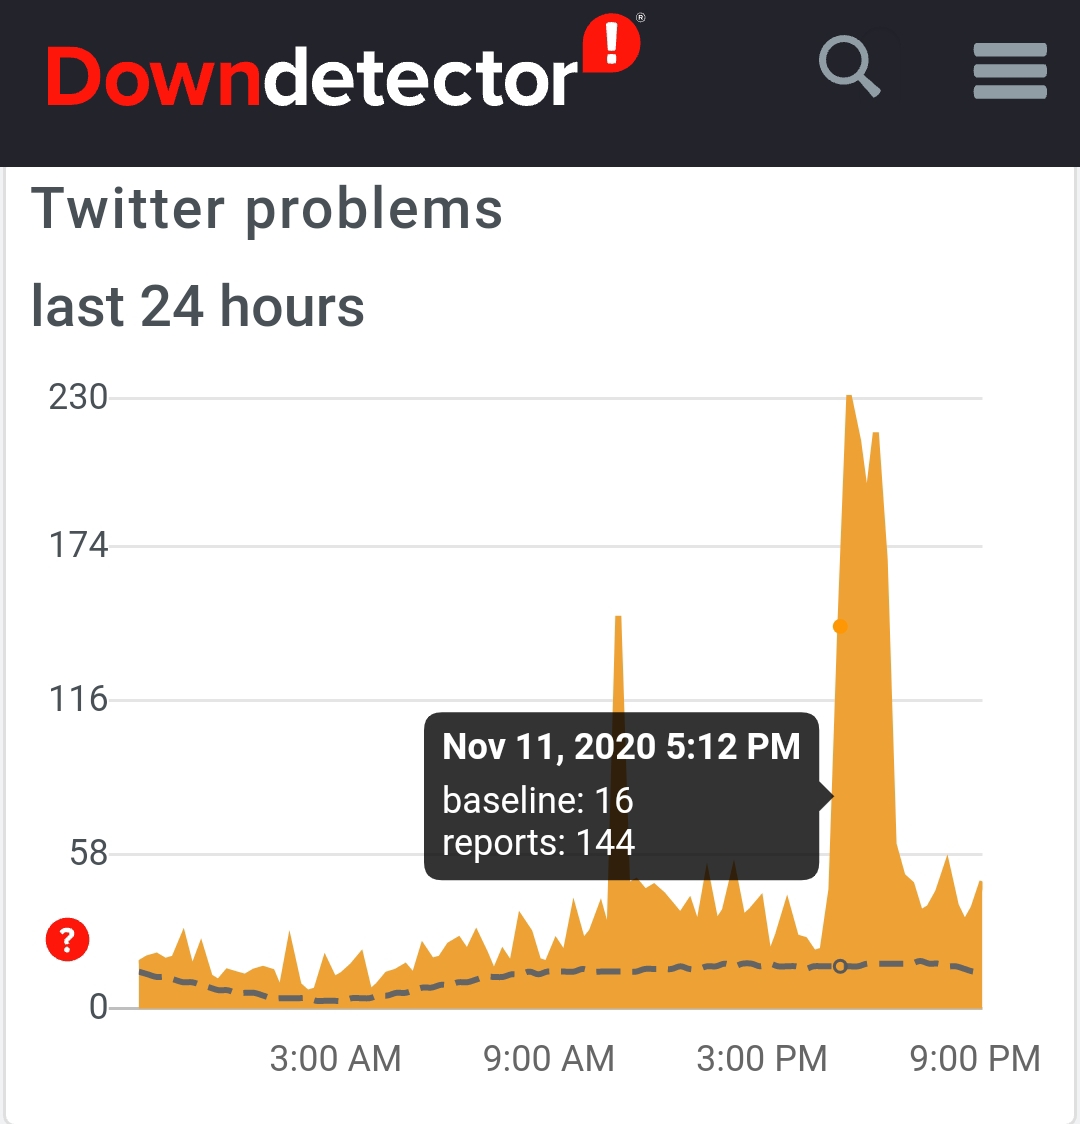 3. Let's next look at this ol' plantation of information control we like to call Twitter:Problems also surged at roughly the same time. #TwitterTyranny